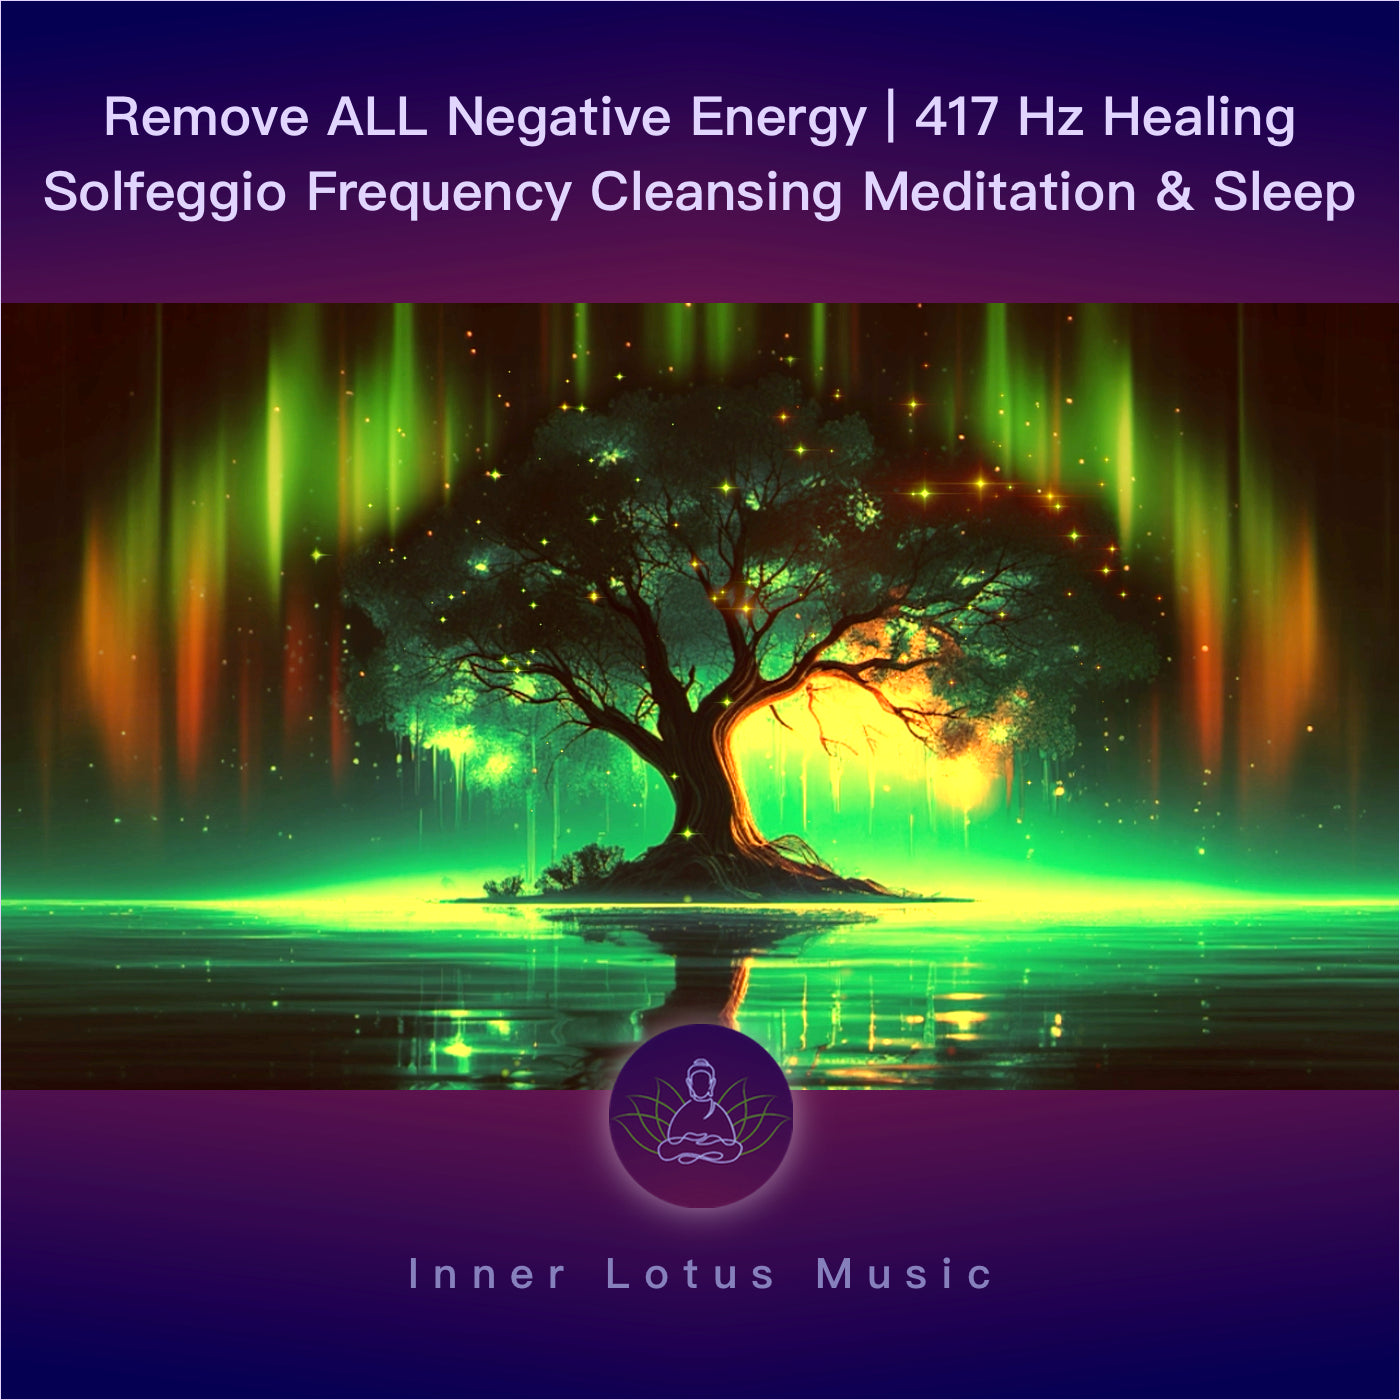 Remove ALL Negative Energy | 417 Hz Healing Solfeggio Frequency Cleansing Meditation & Sleep Music